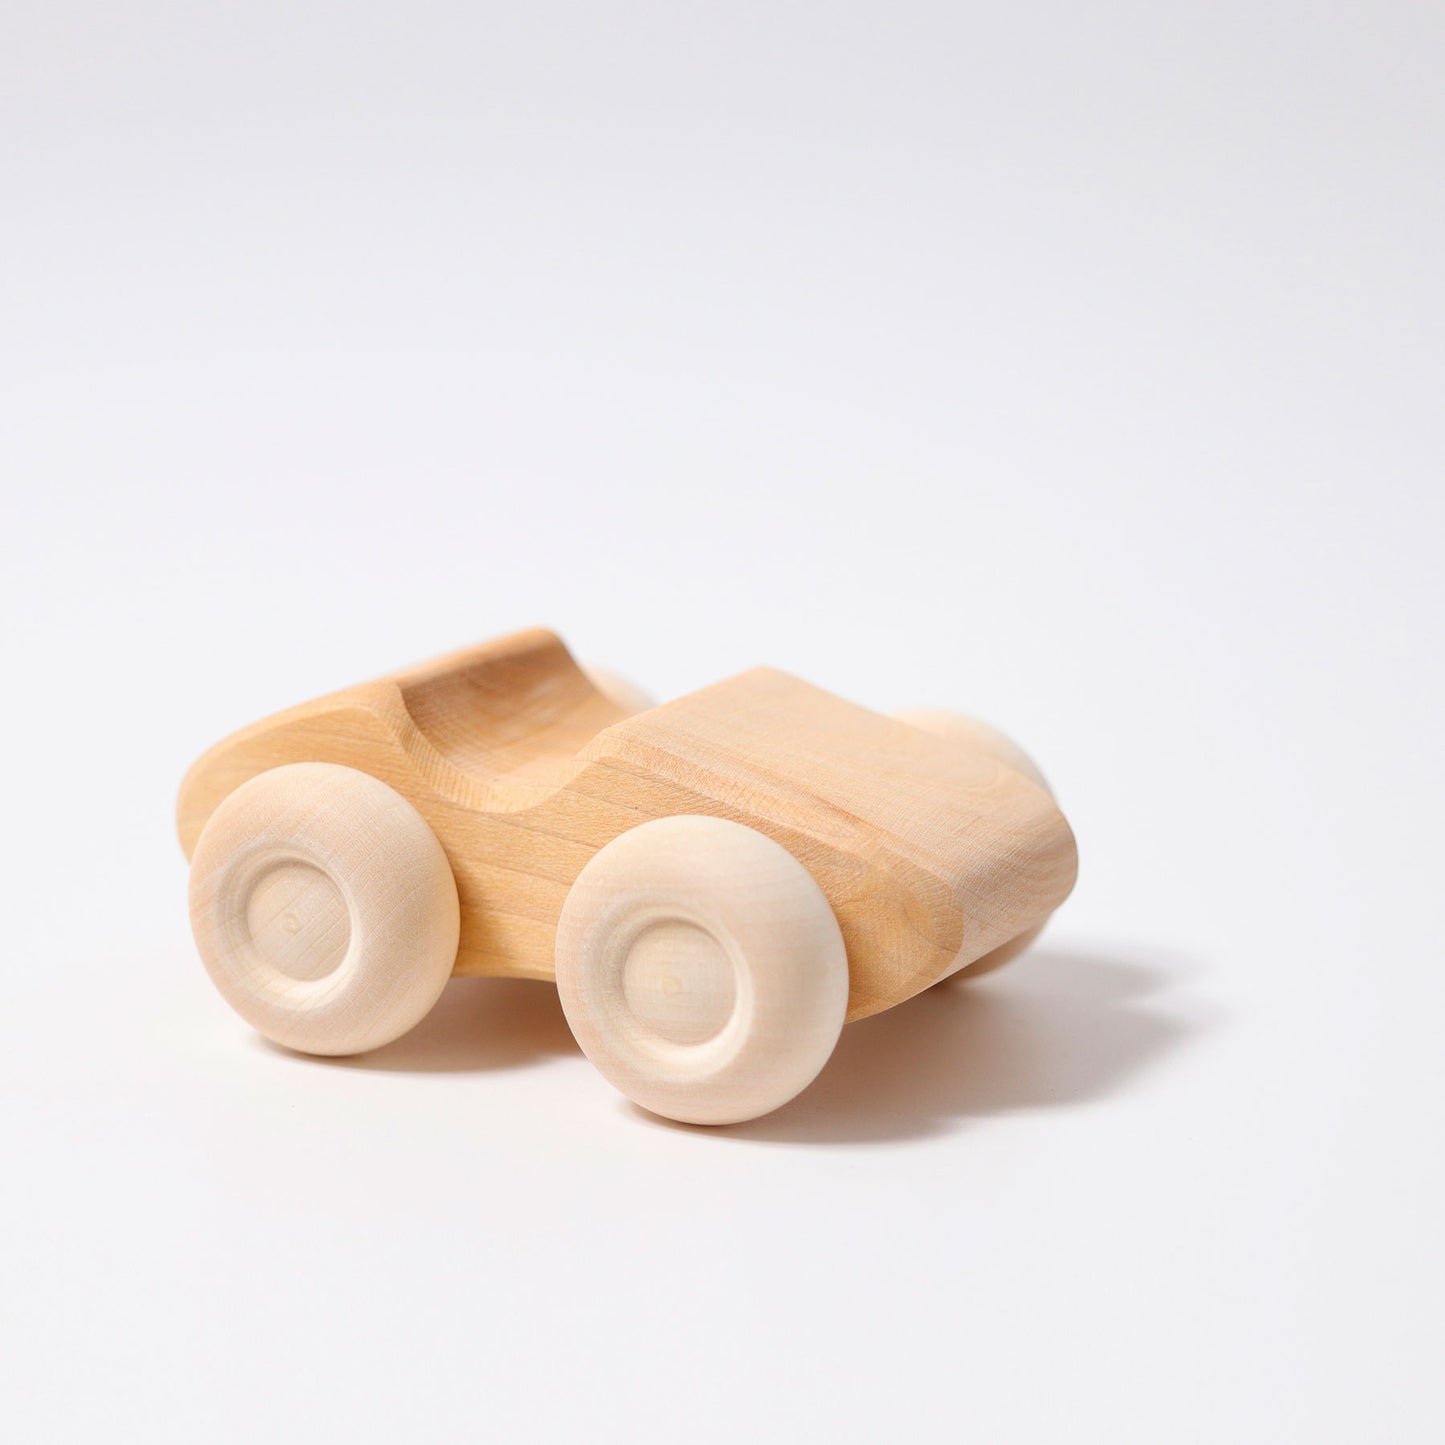 Grimm's - Six Wooden Cars (Natural)